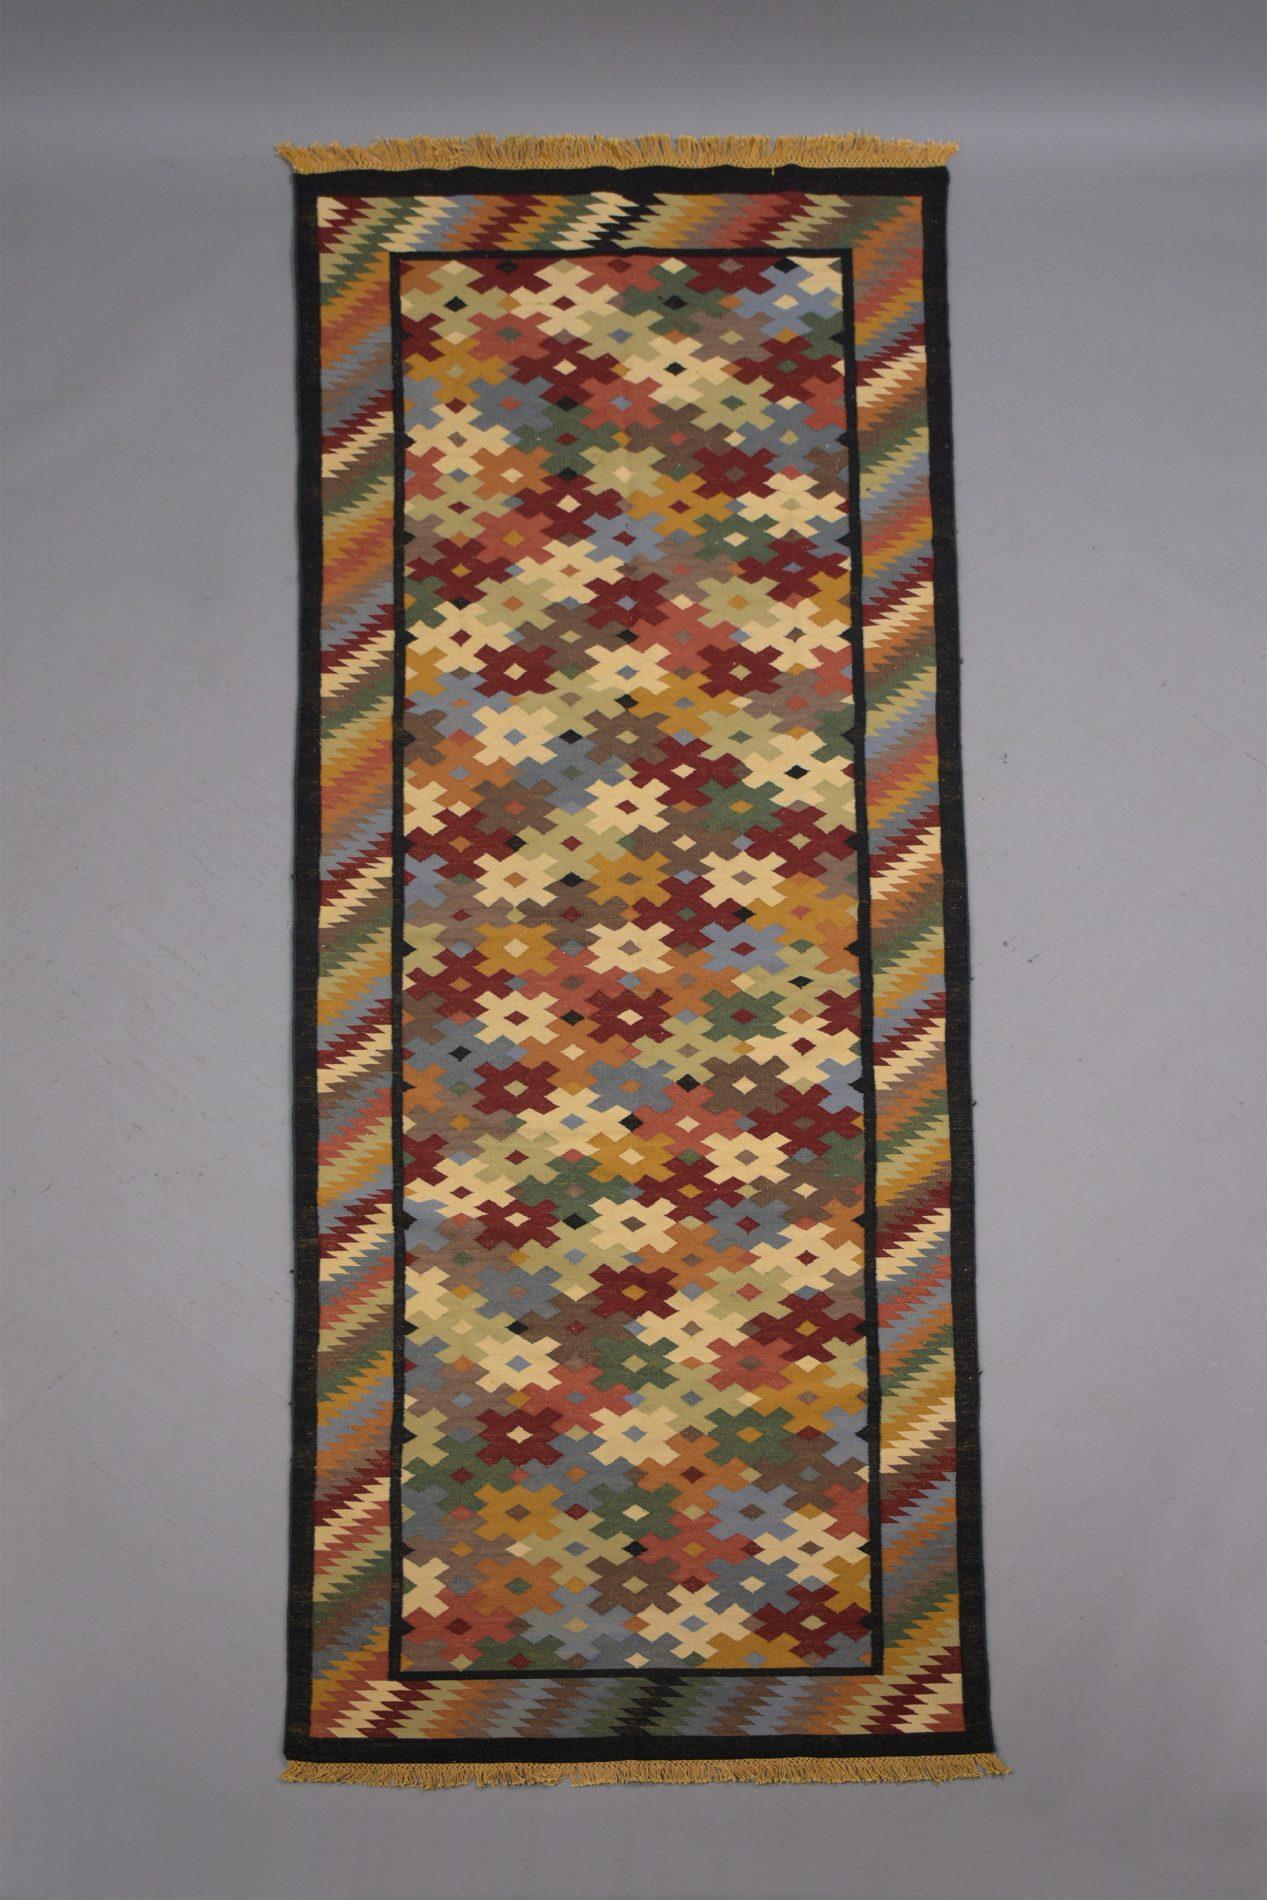 Early 1900s Multicolor Symmetrical Pattern Textile Rug: Perfect for Sophisticated Spaces